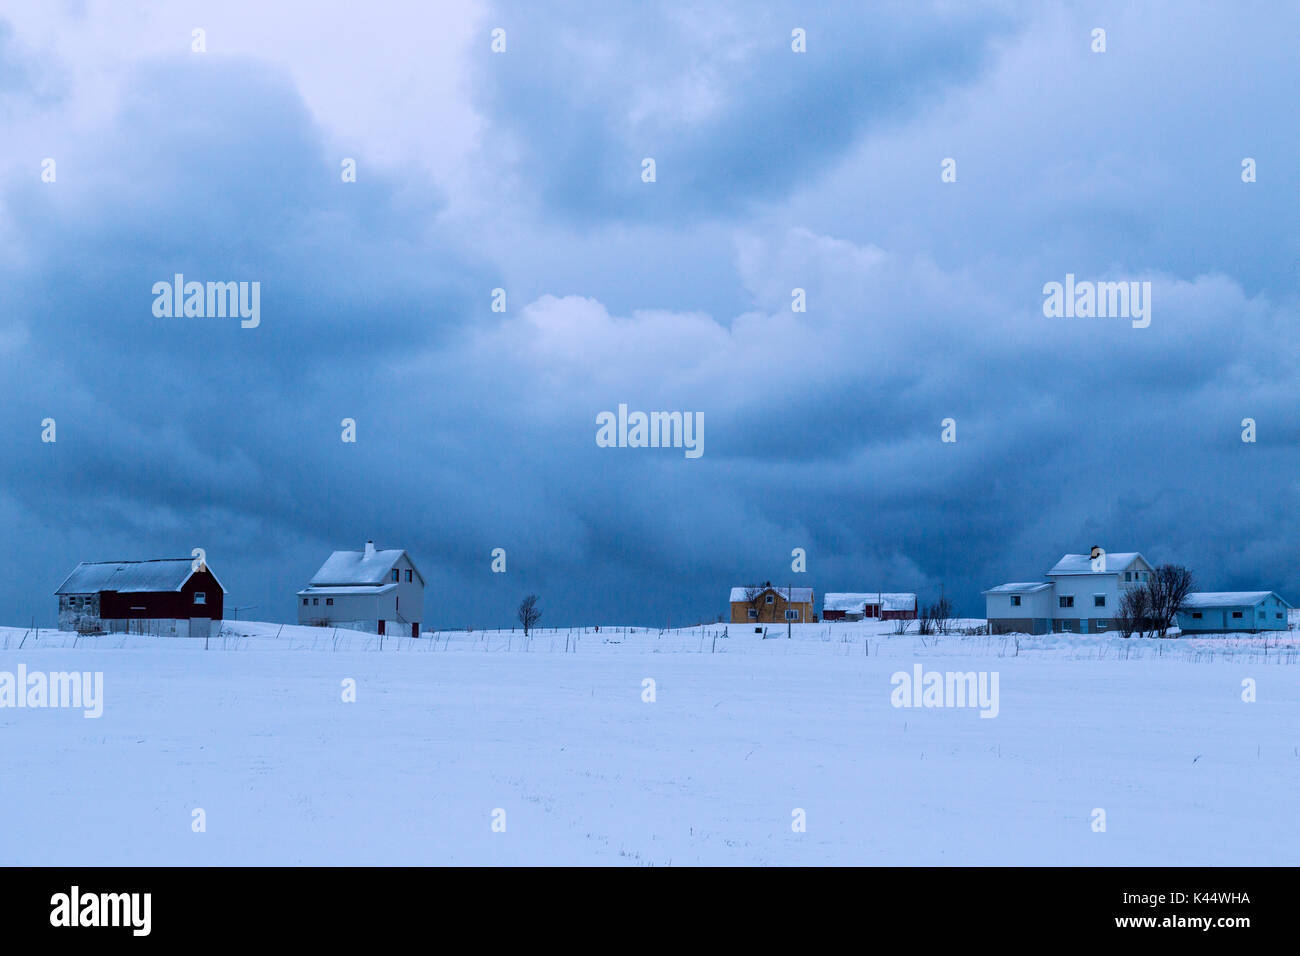 Clouds on the village of fishermen surrounded by snow at dusk Flakstad Lofoten Islands Norway Europe Stock Photo